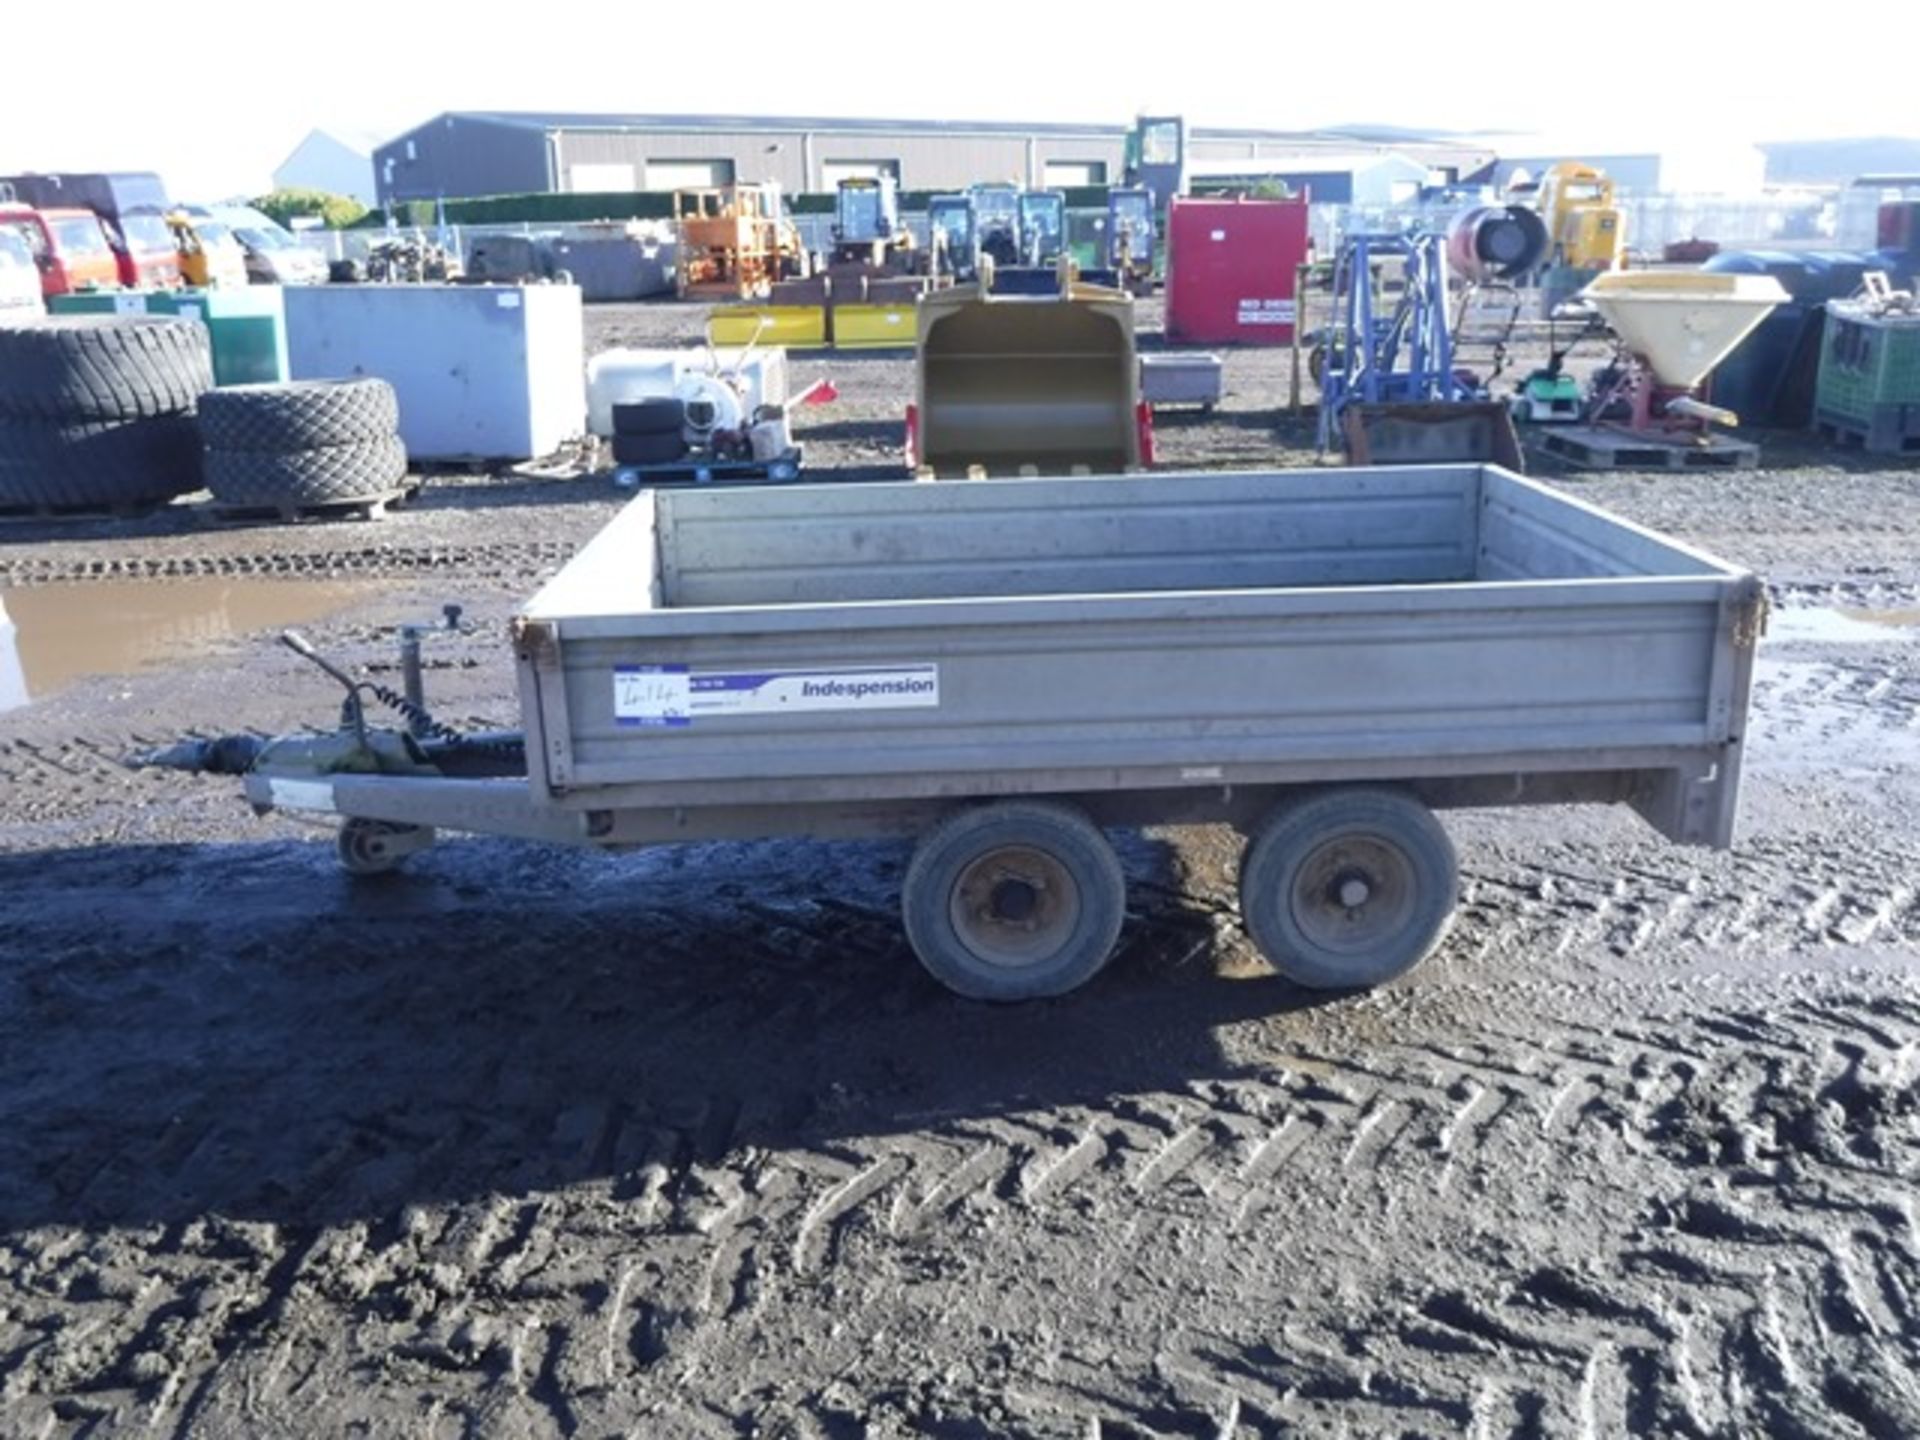 INDESPENSION 8' X 4.5' TWIN AXLE DROP SIDE TRAILER. ID 079183. ASSET NO 758-6222 - Image 3 of 5